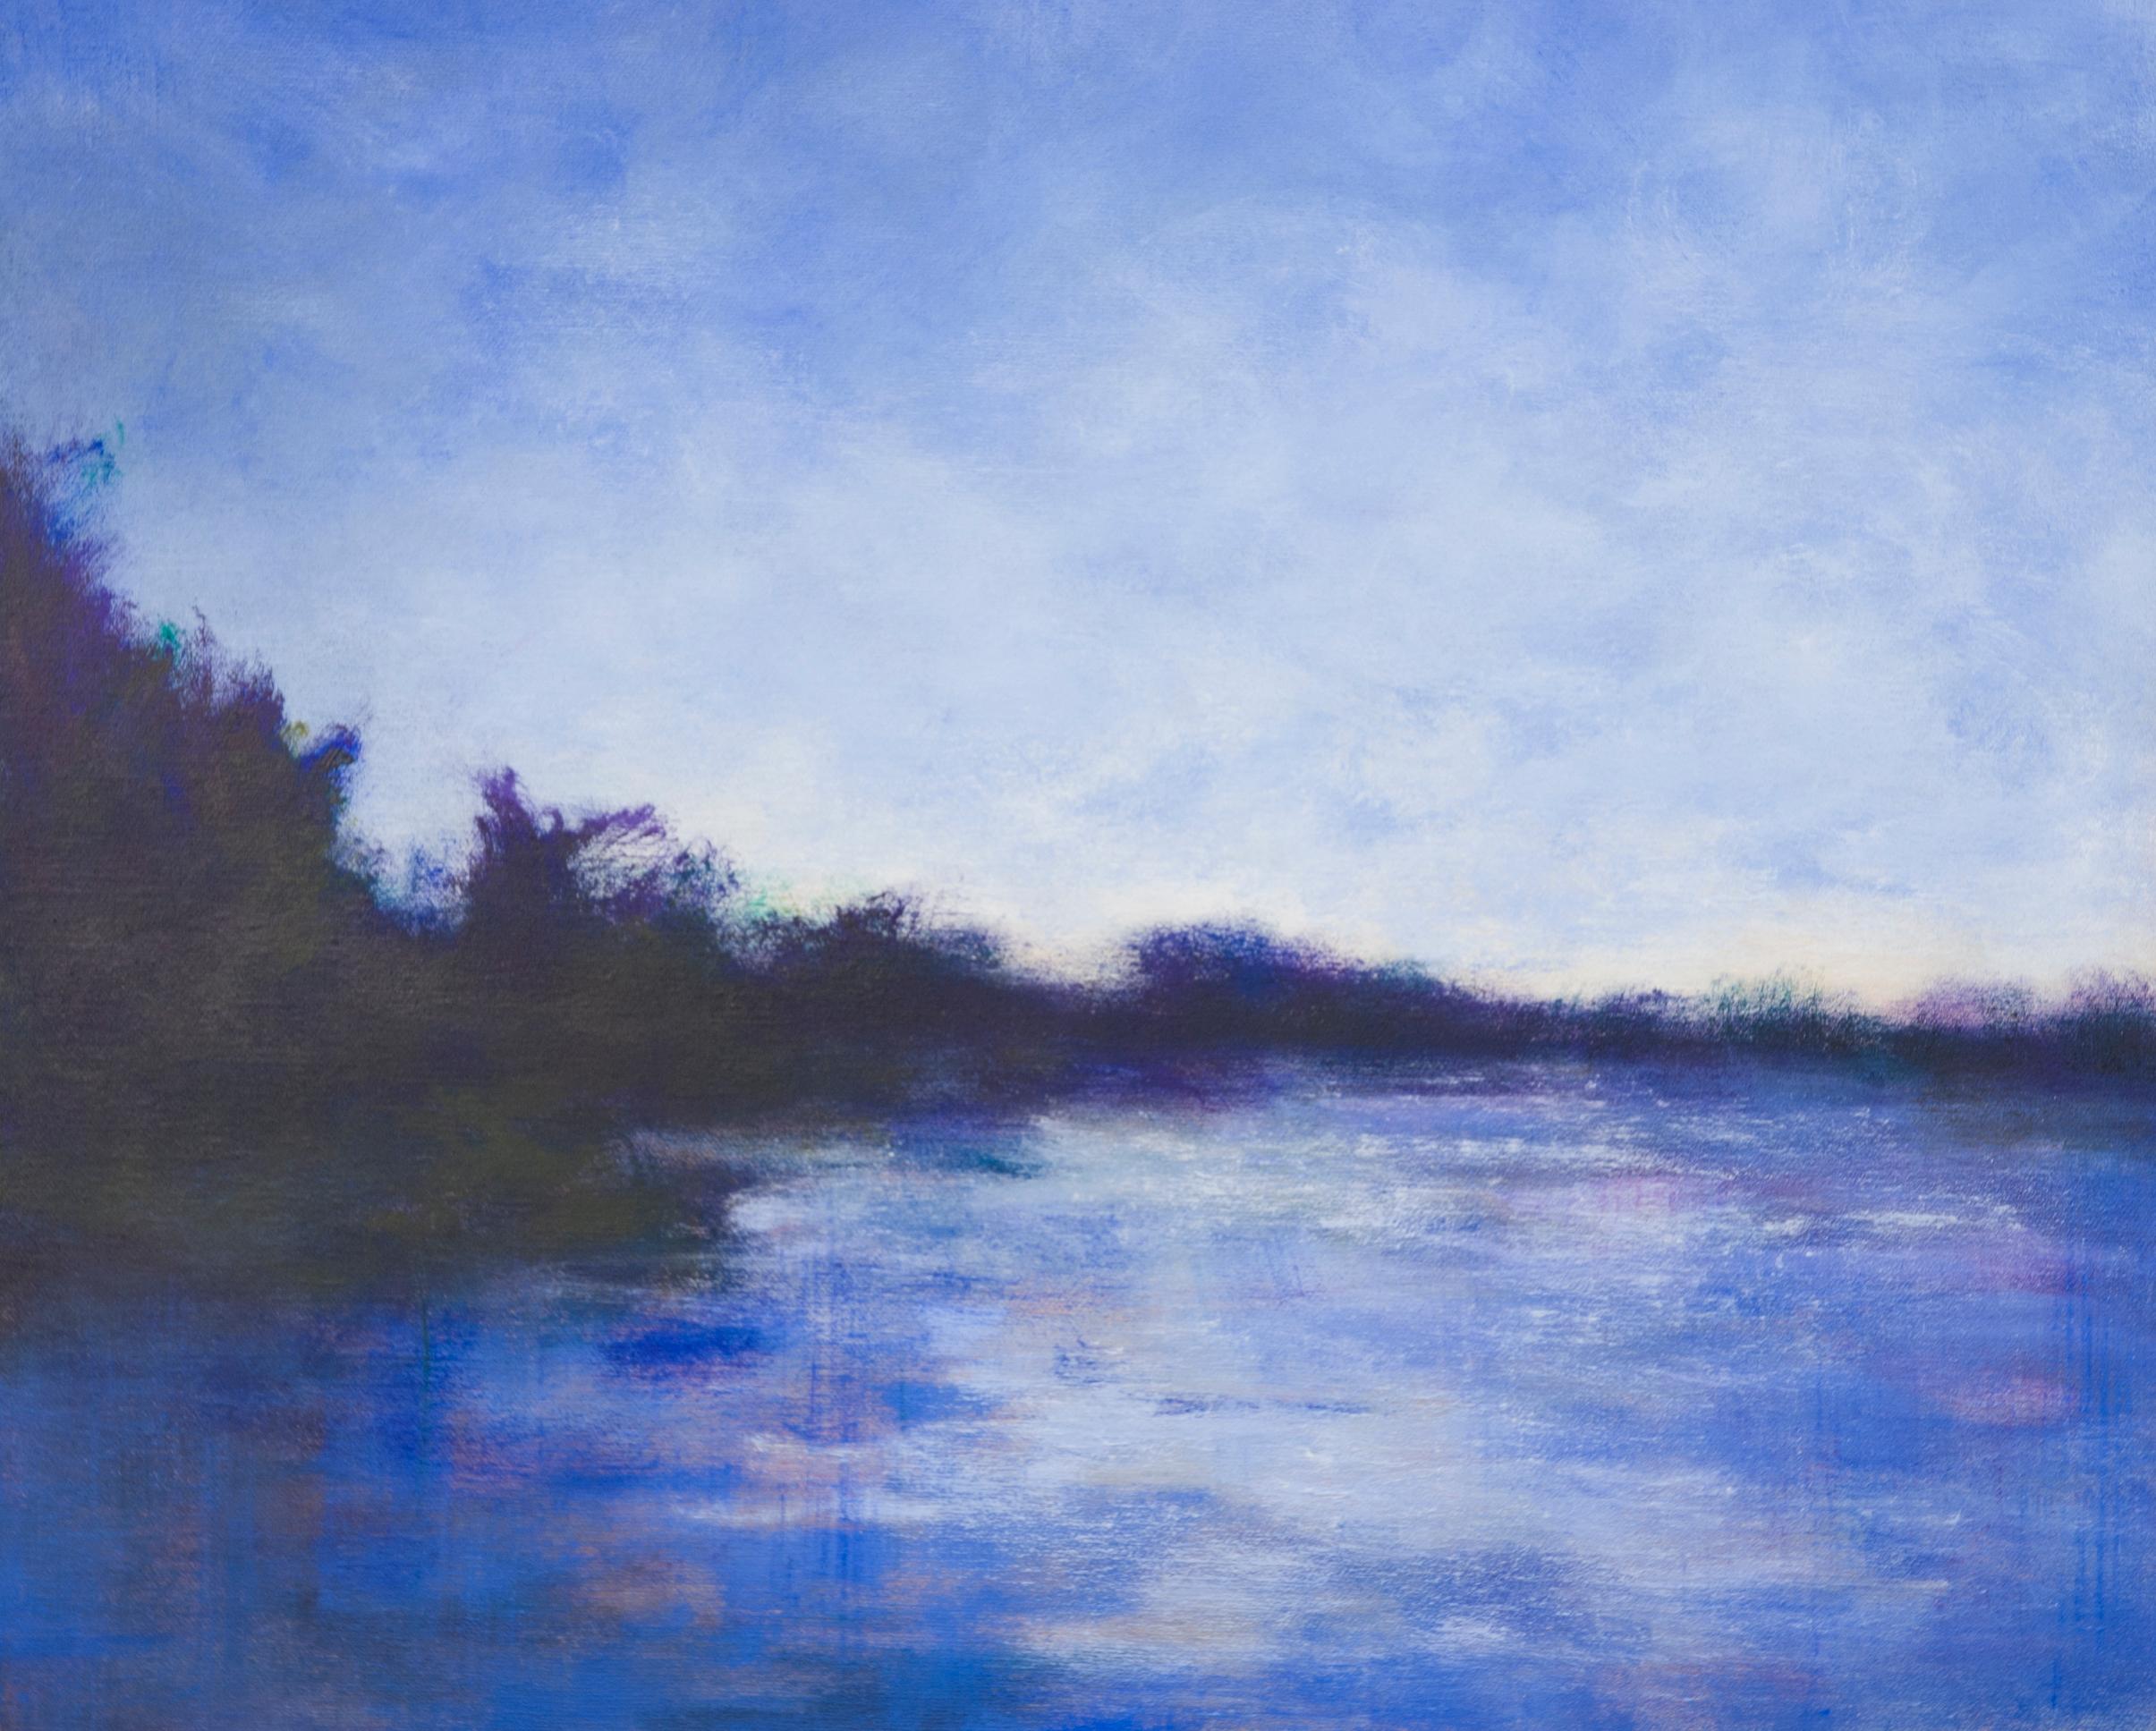 <p>Artist Comments<br>The deep blue light of evening is often described as peaceful and tranquil. Within each painting I hope to create a sense of stillness and serenity.</p><p>About the Artist<br>Victoria Veedell loves capturing the essence of